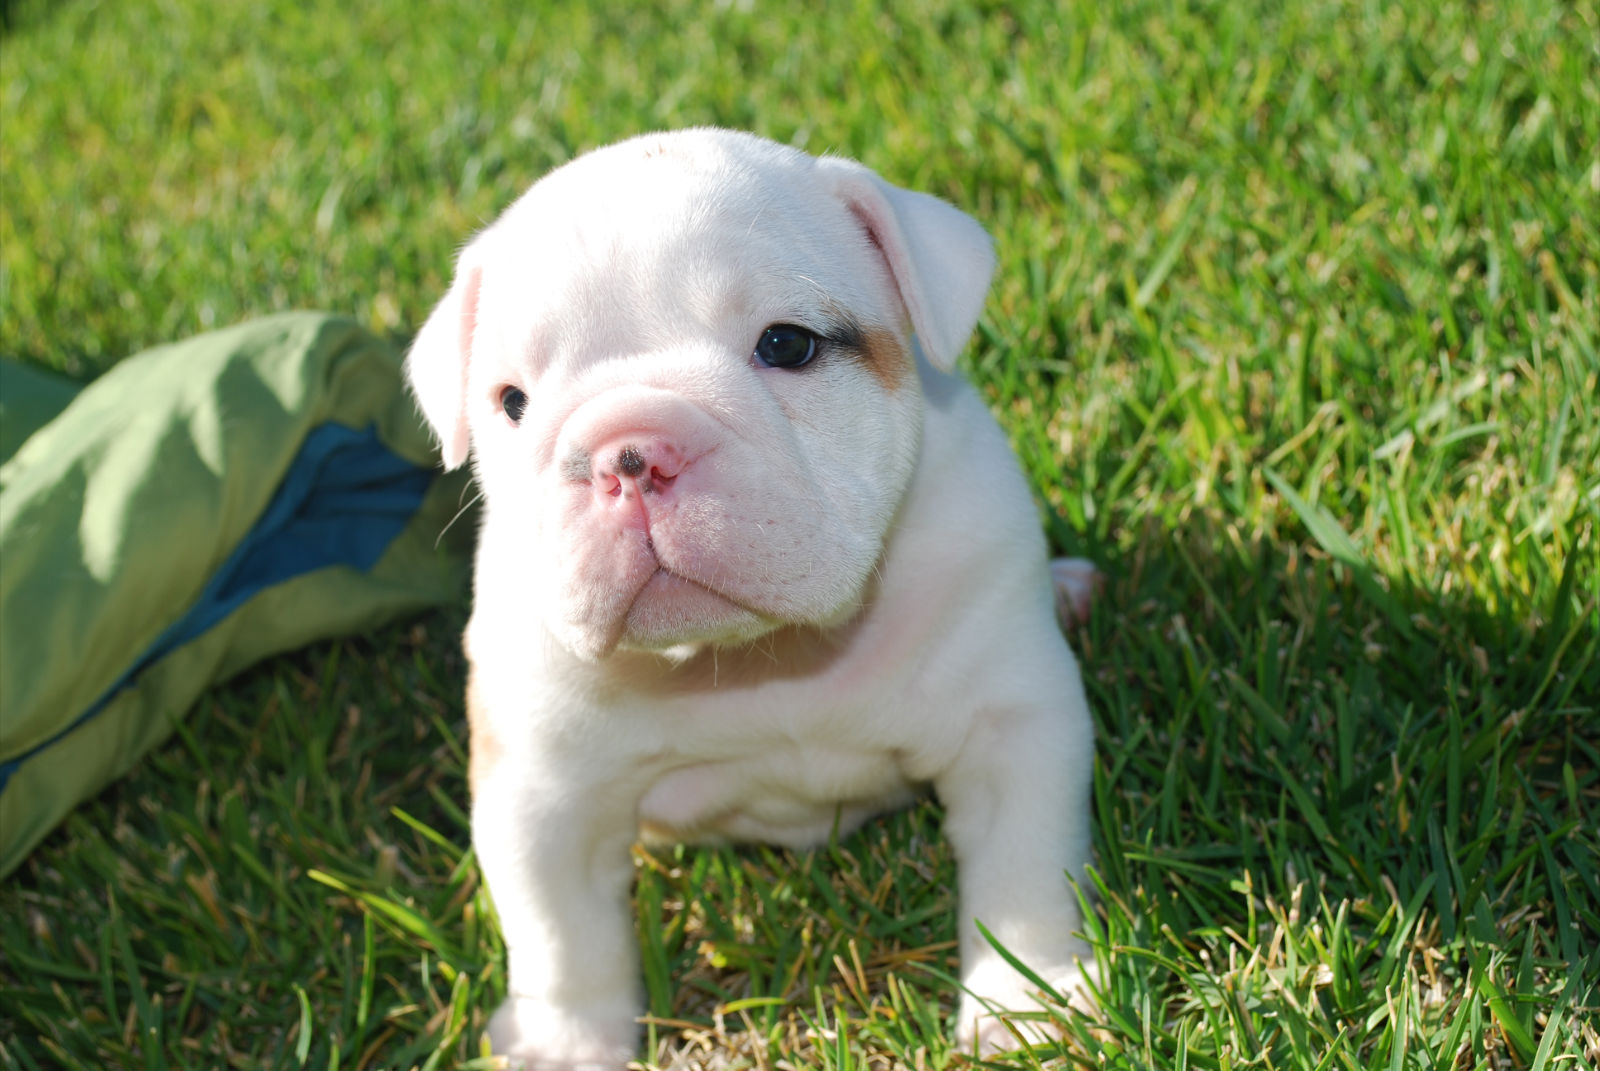 And Wallpaper Beautiful White English Bulldog On The Grass Pictures